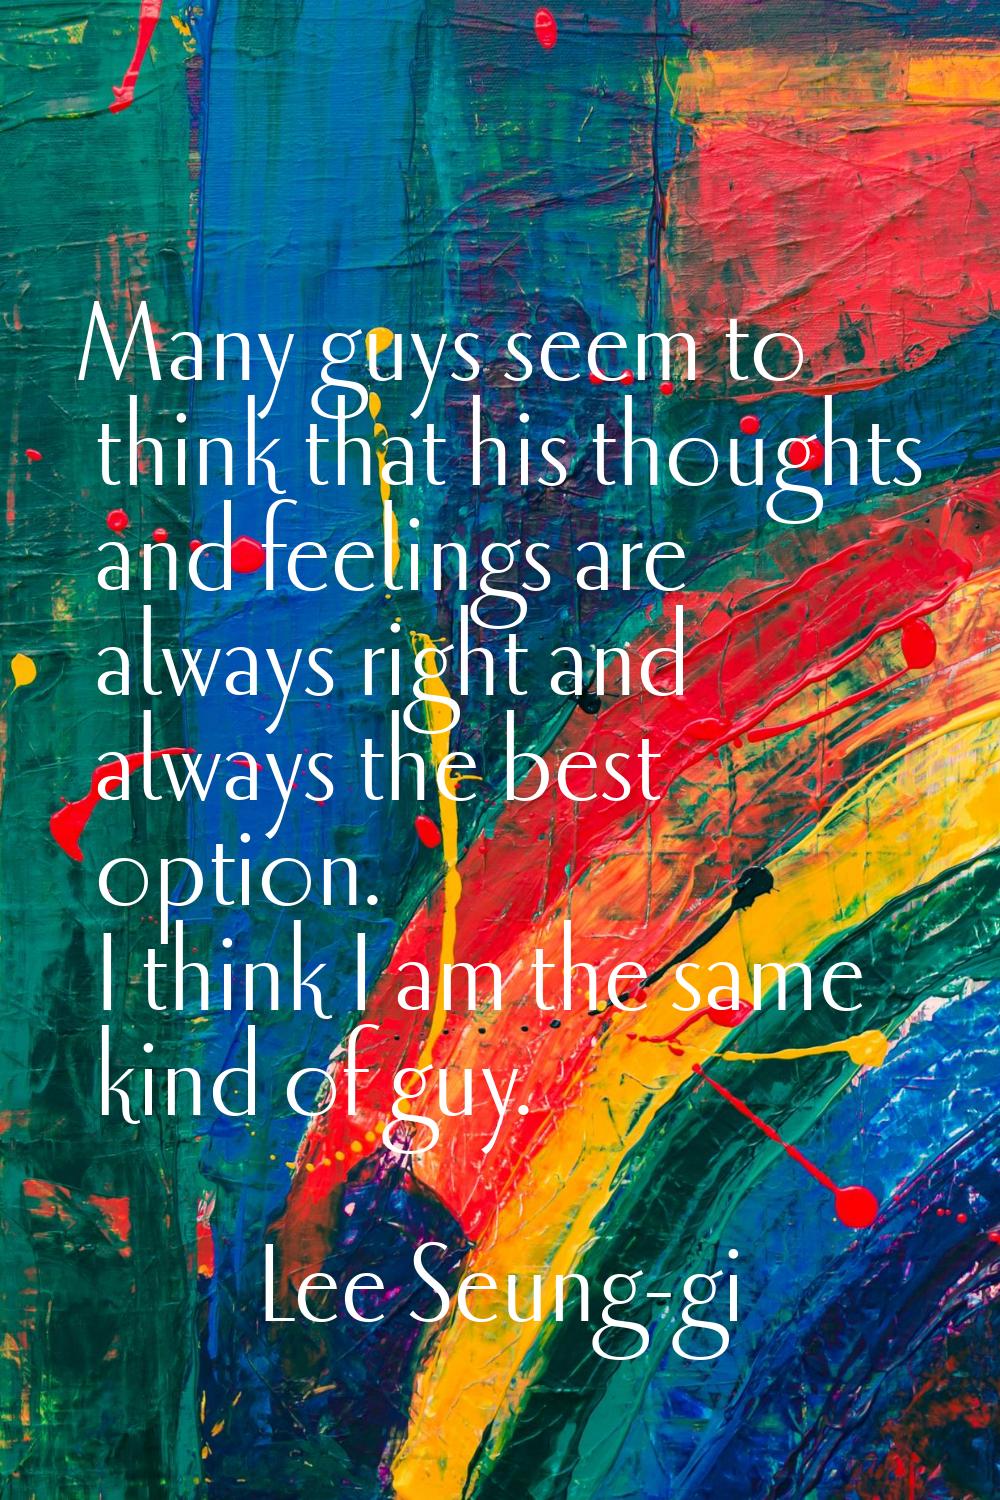 Many guys seem to think that his thoughts and feelings are always right and always the best option.